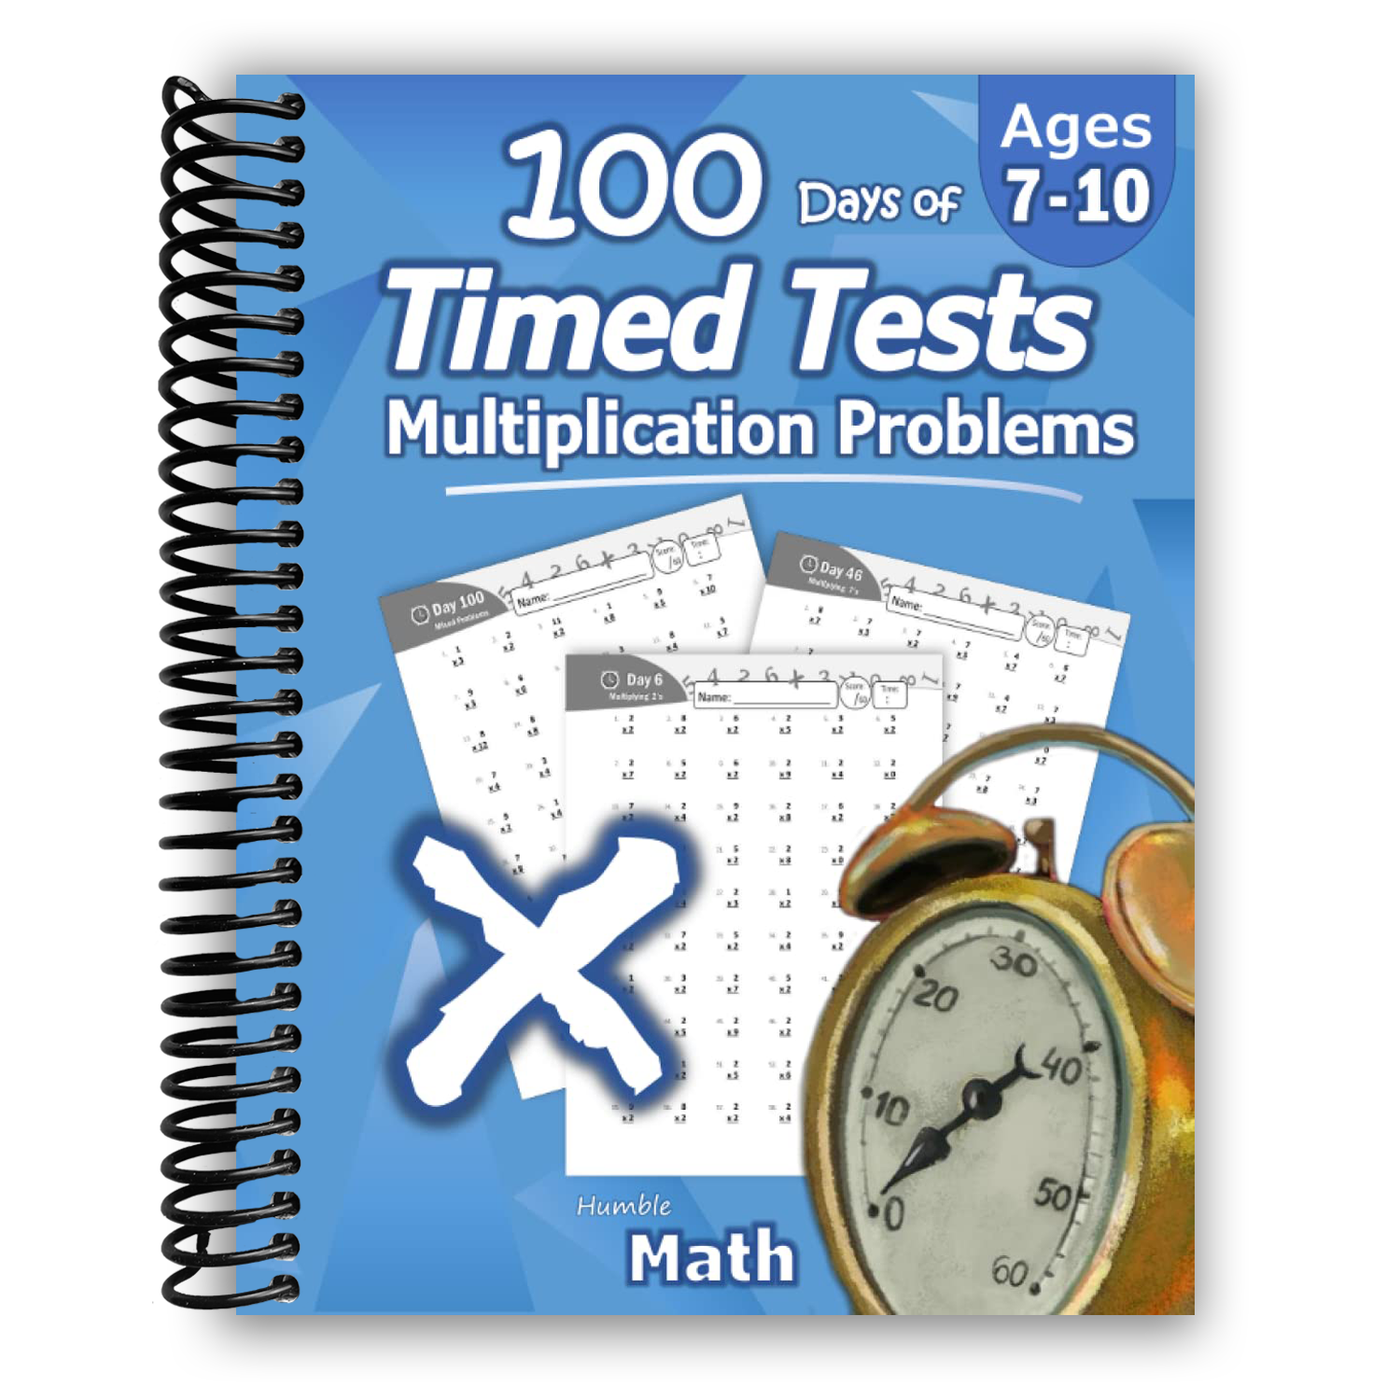 Humble Math - 100 Days of Timed Tests (Spiral Bound)